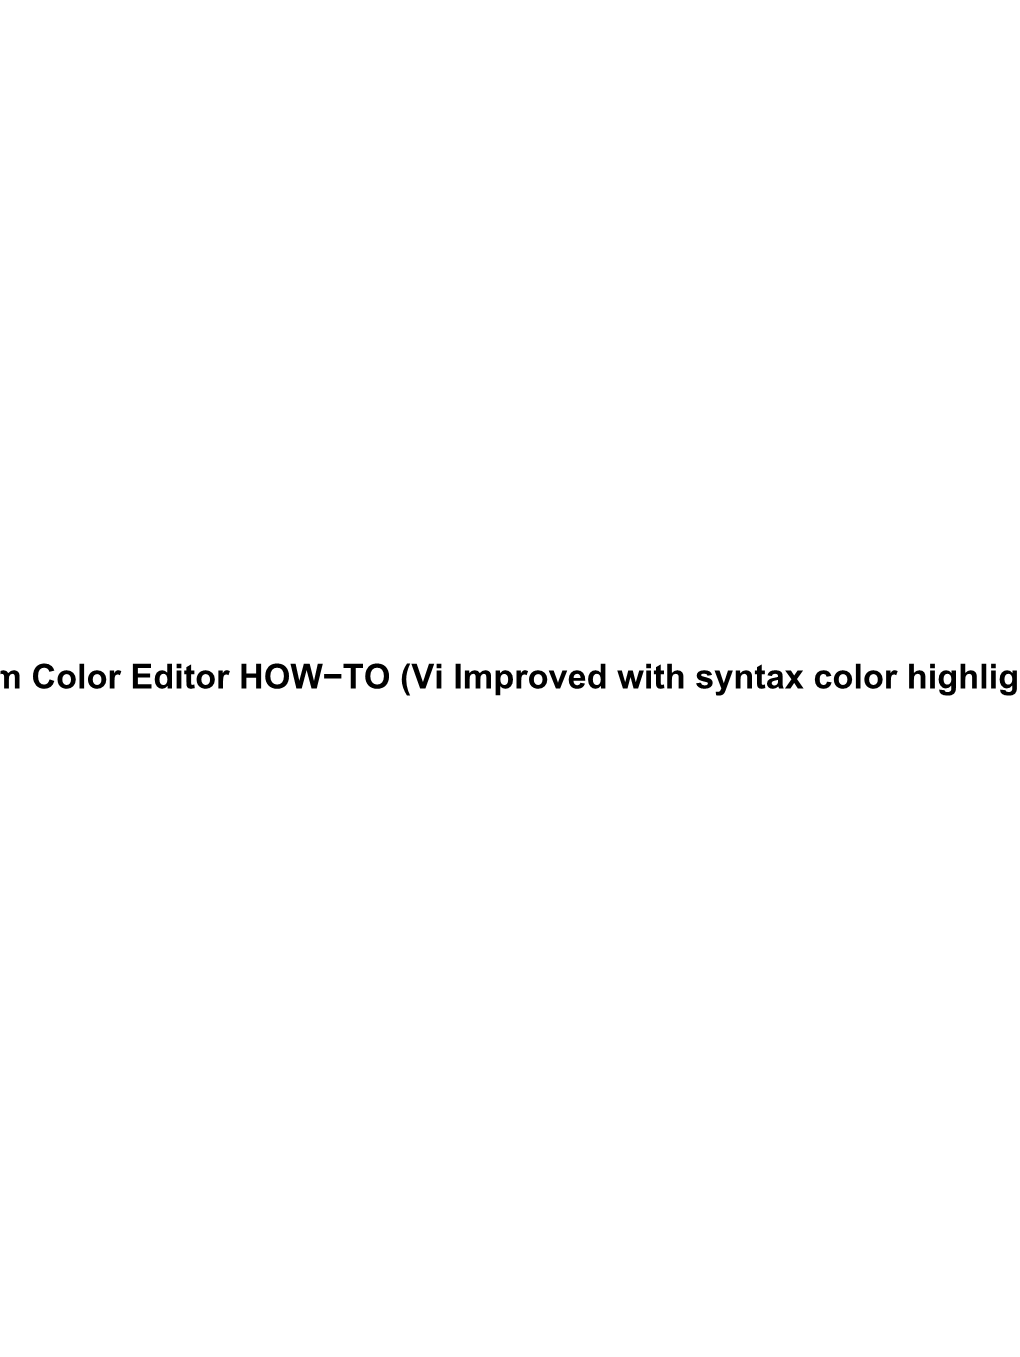 Vim Color Editor HOW-TO (Vi Improved with Syntax Color